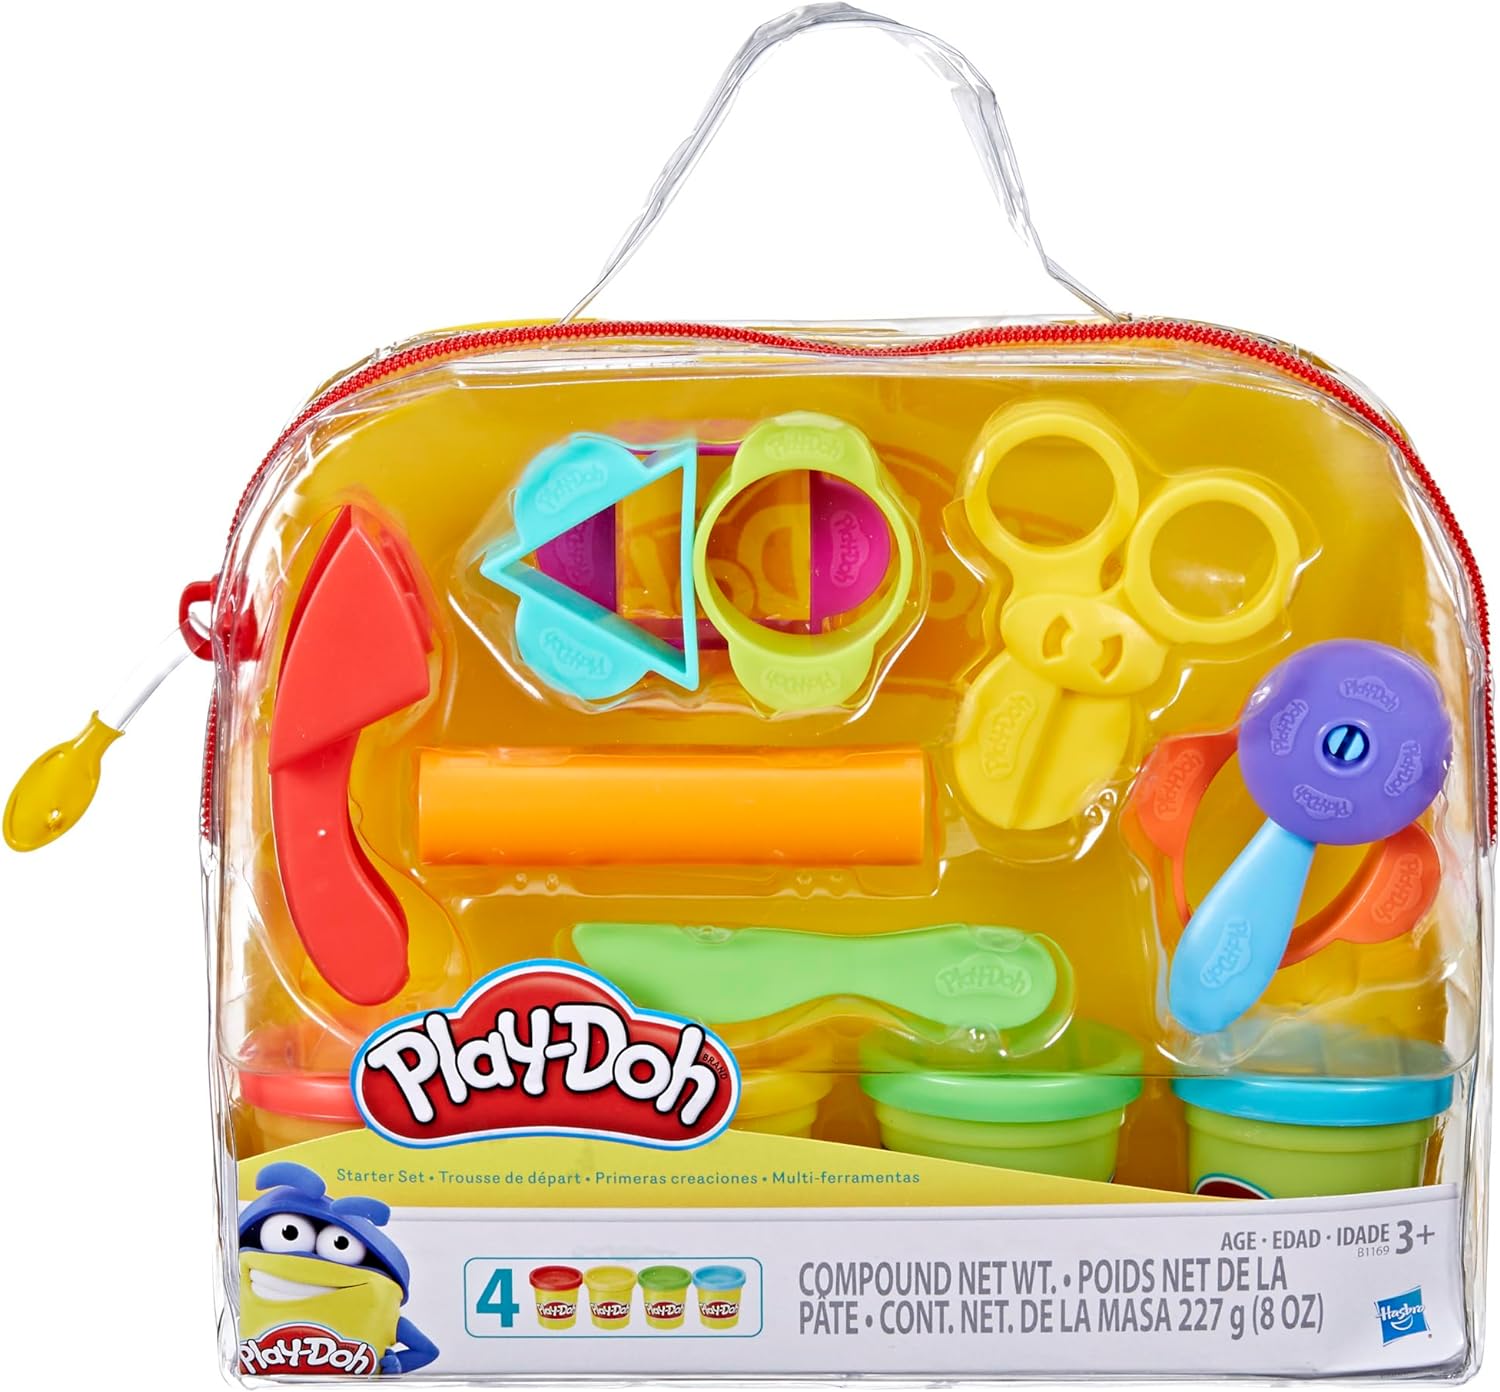 14-Piece Play-Doh Starter Set w/ 4 Cans, 9 Tools & Carry Case $5.86 + Free Shipping w/ Prime or on orders over $25